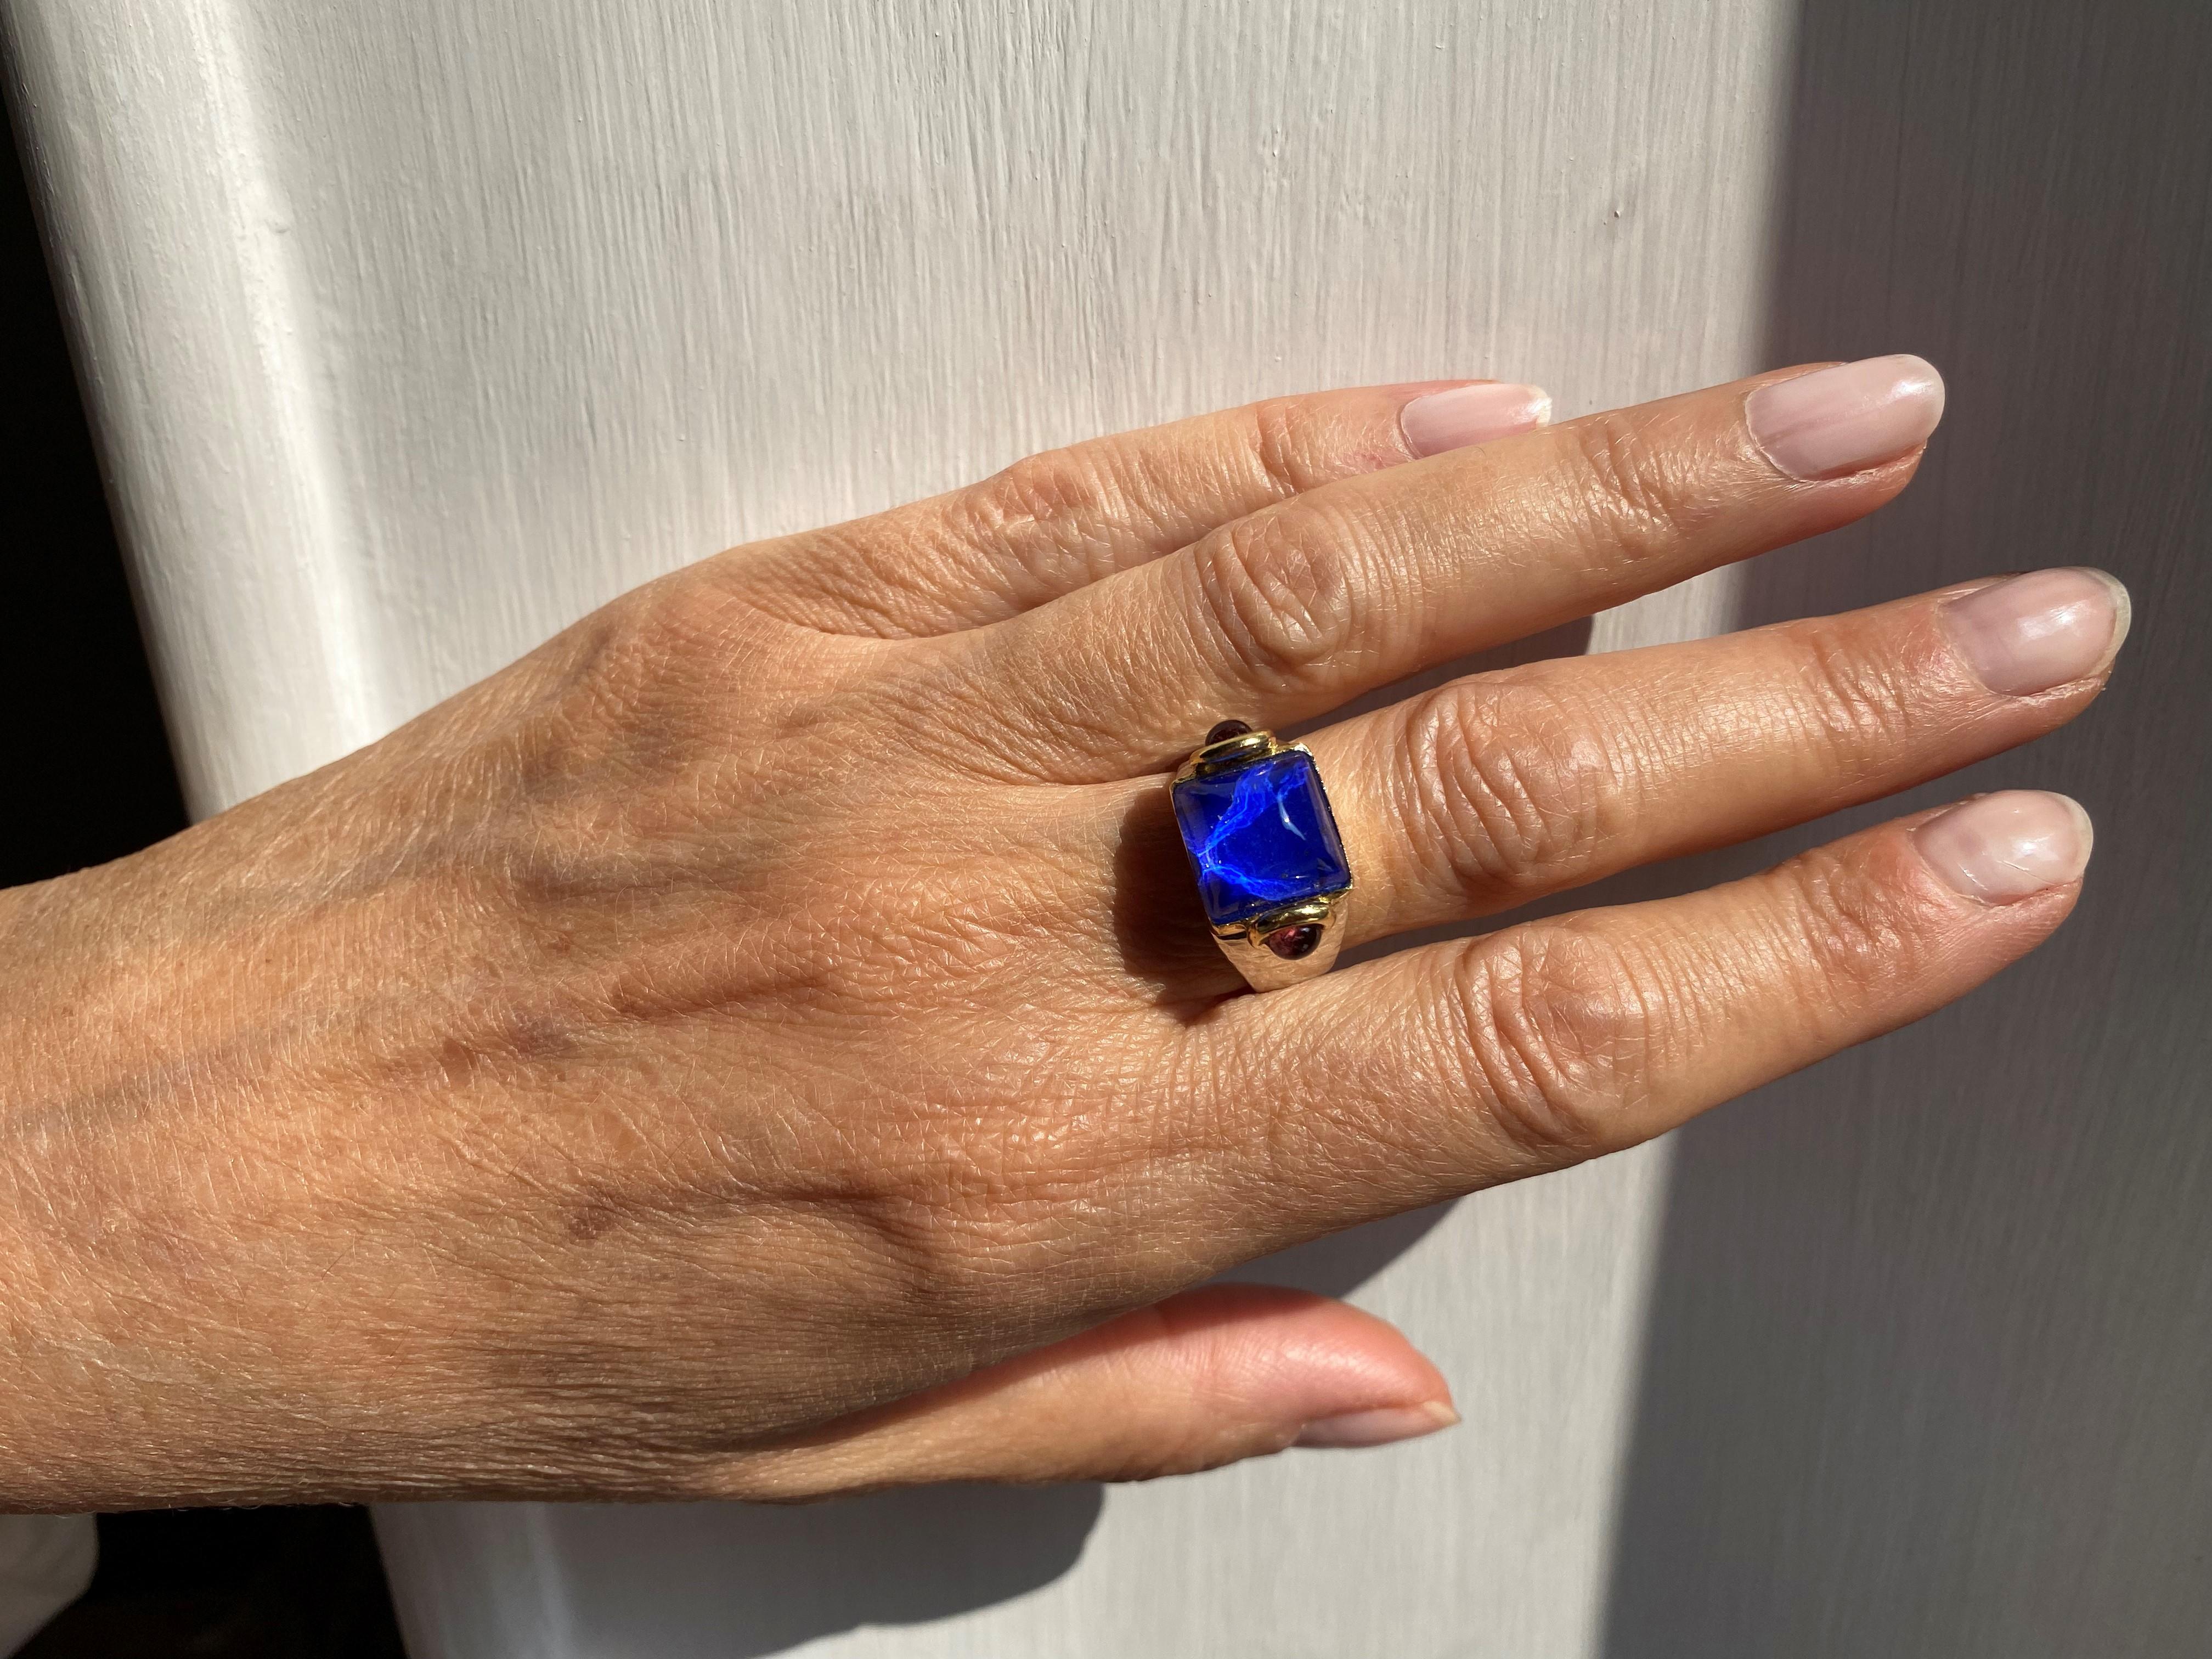 Platinum Rock Crystal Cabochon Cut Pink Tourmaline Lapis Lazuli 18 Karat Yellow Gold Unisex Design Ring
Any size available in two weeks on order.
This ring is entirely manufactured, in an artisanal way, in Rome, Italy in platinum and every step of